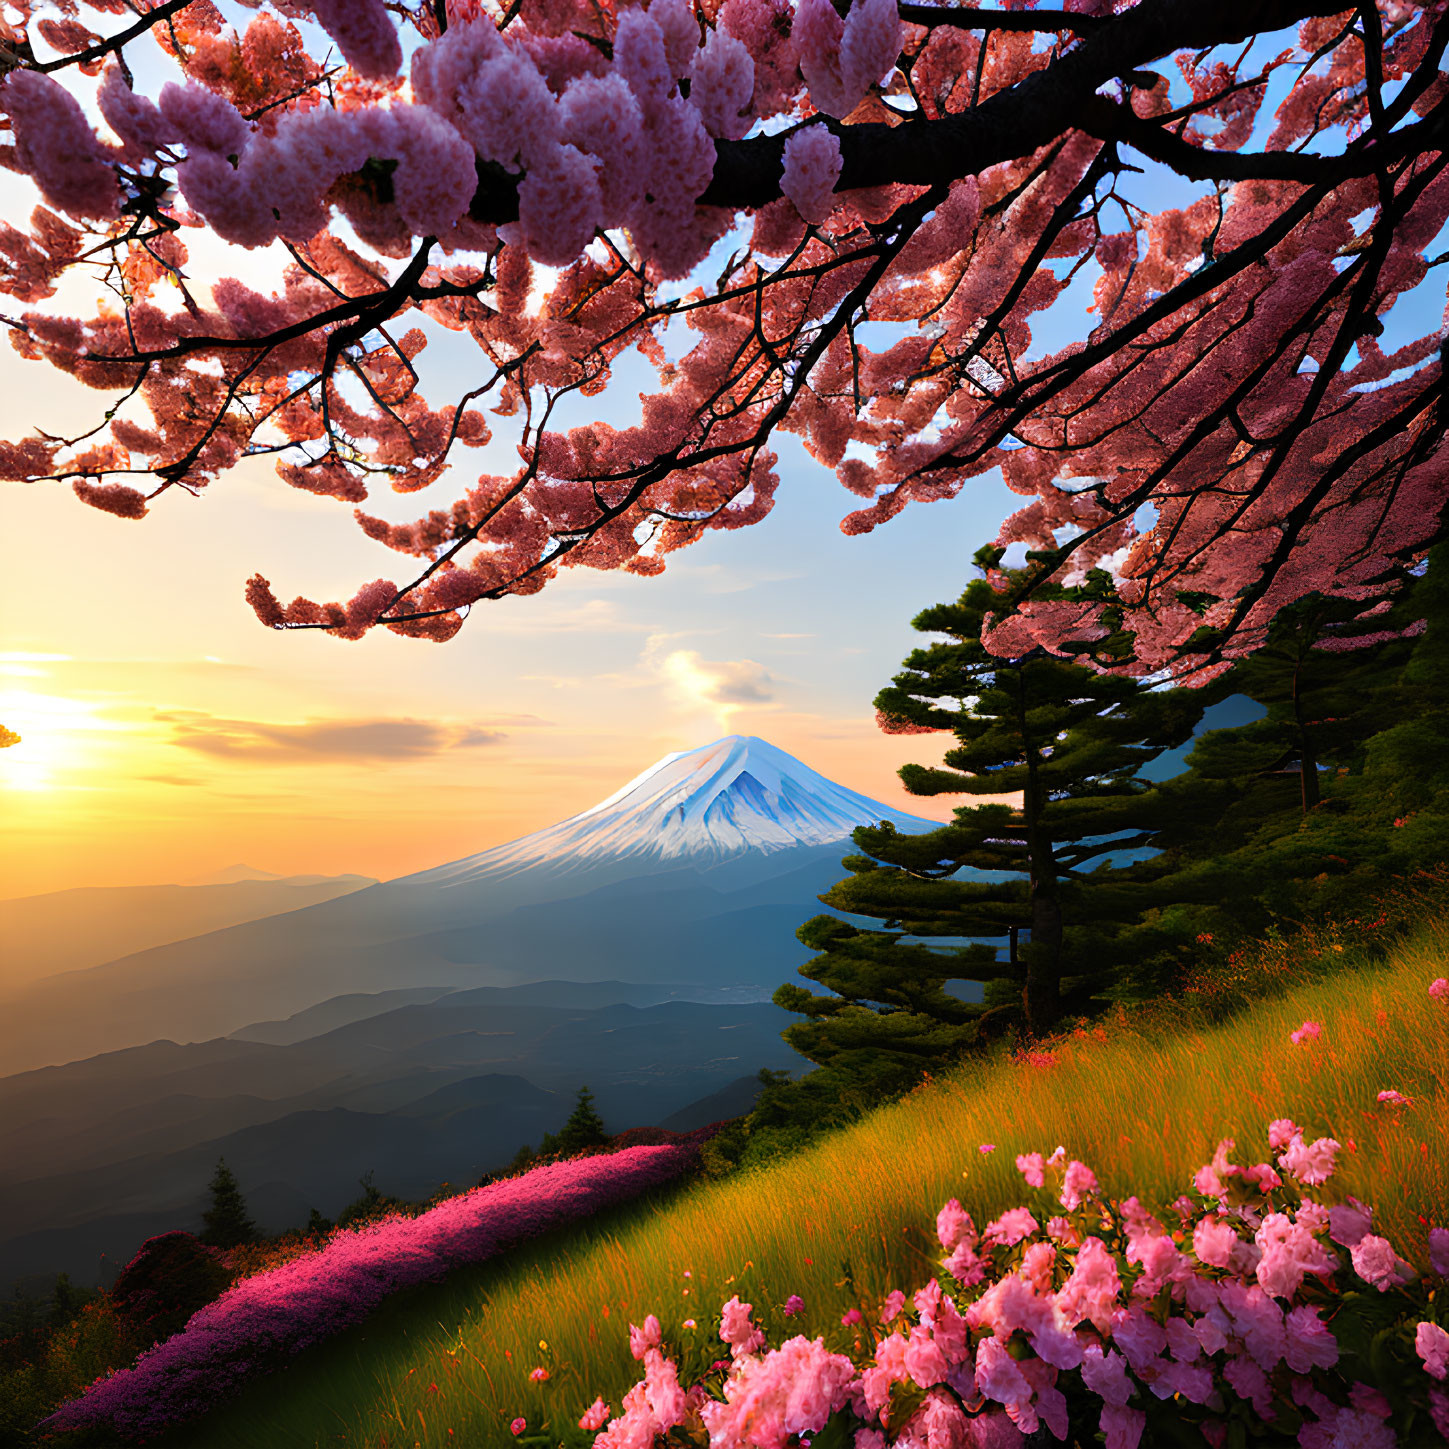 Pink Cherry Blossoms and Mount Fuji at Sunset with Green Foliage